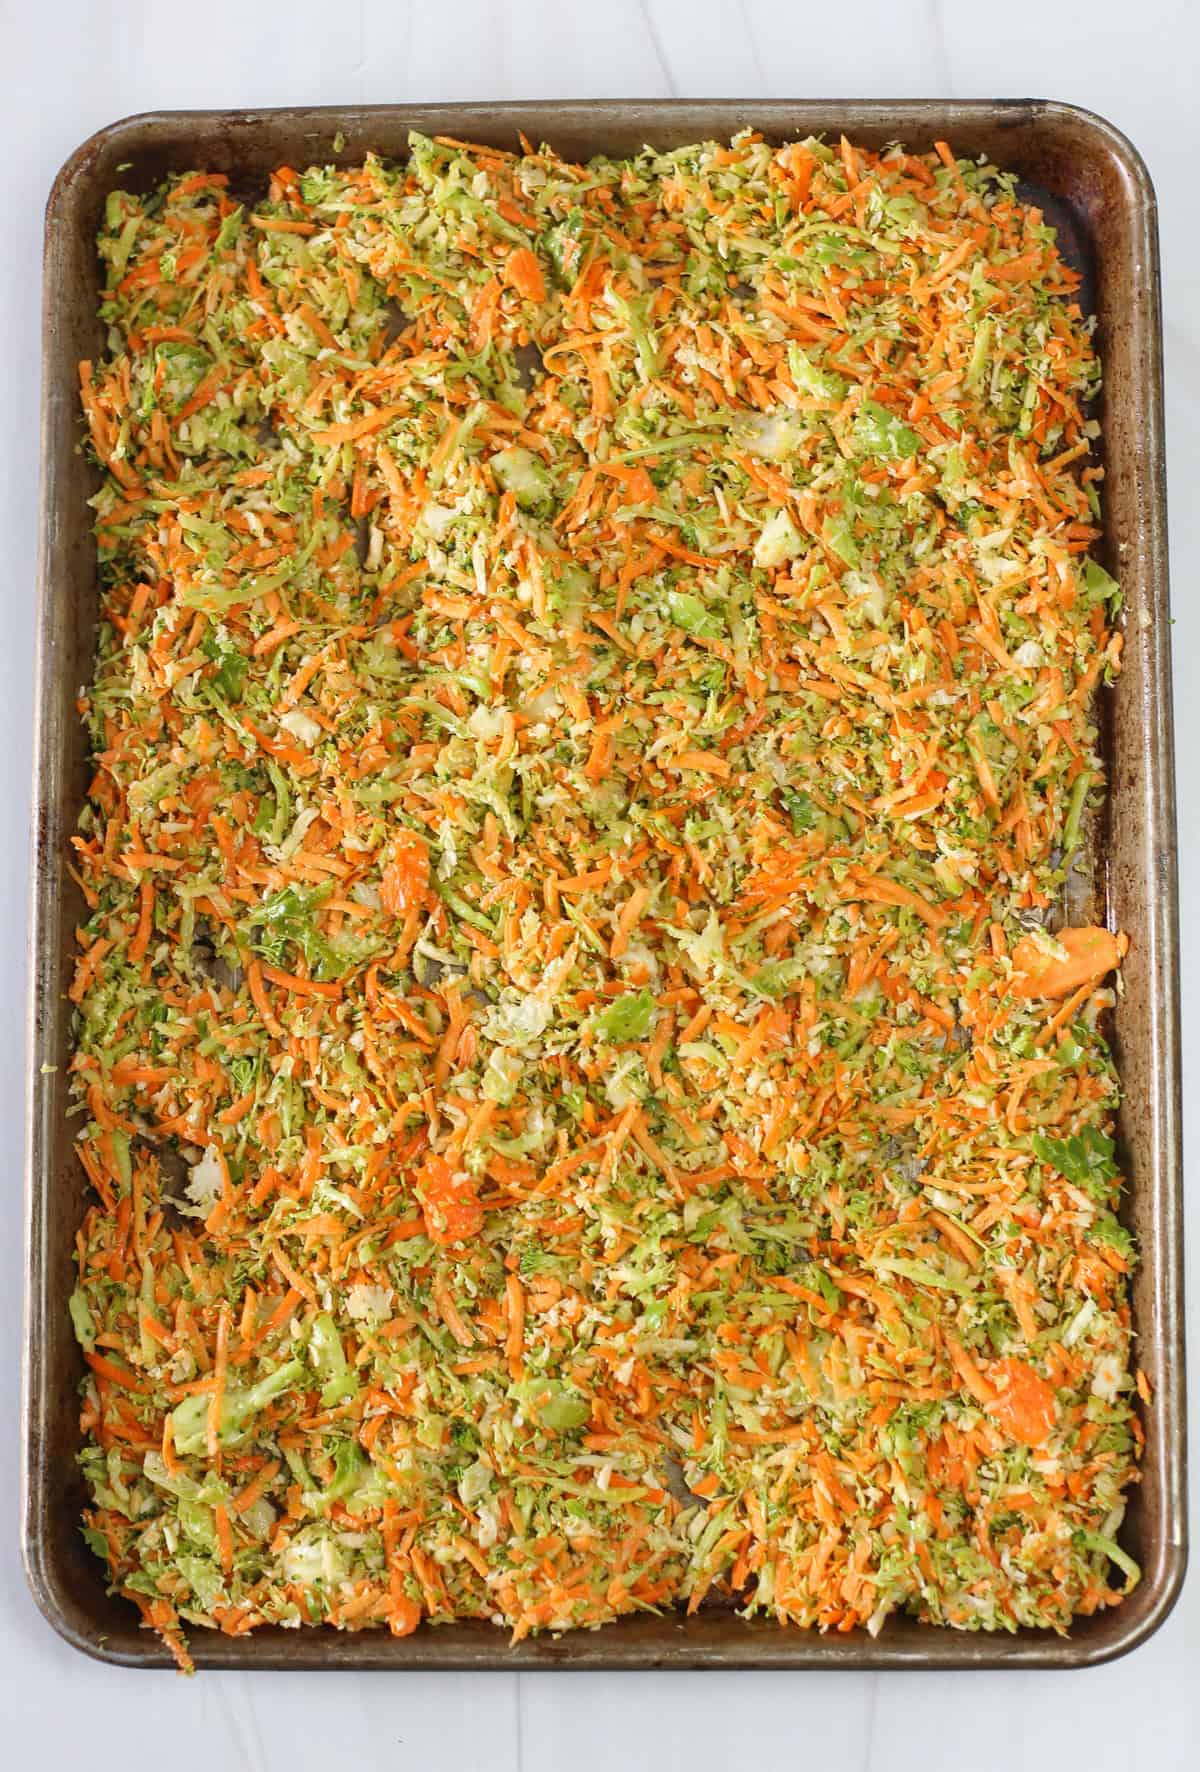 Shredded vegetables spread out on a baking sheet ready to be roasted.